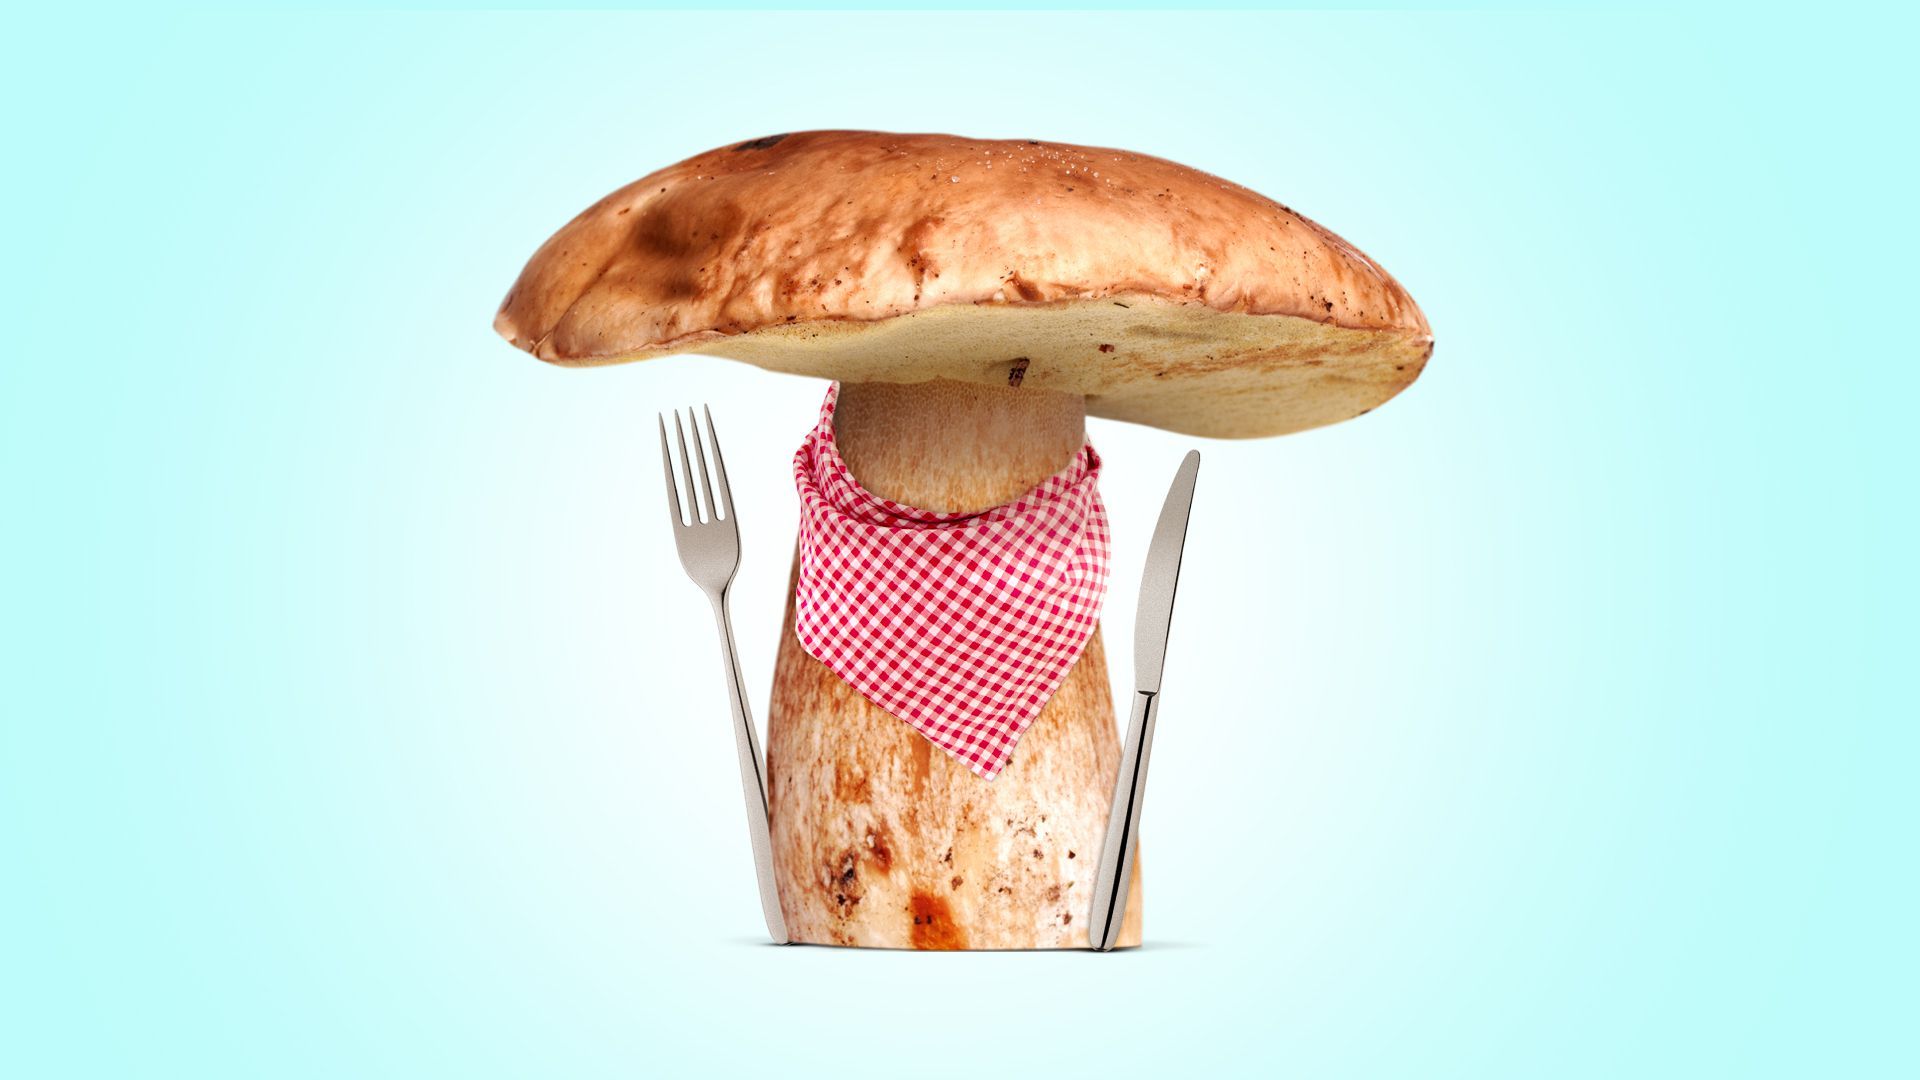 Illustration of a mushroom wearing a napkin around the trunk with a fork and knife